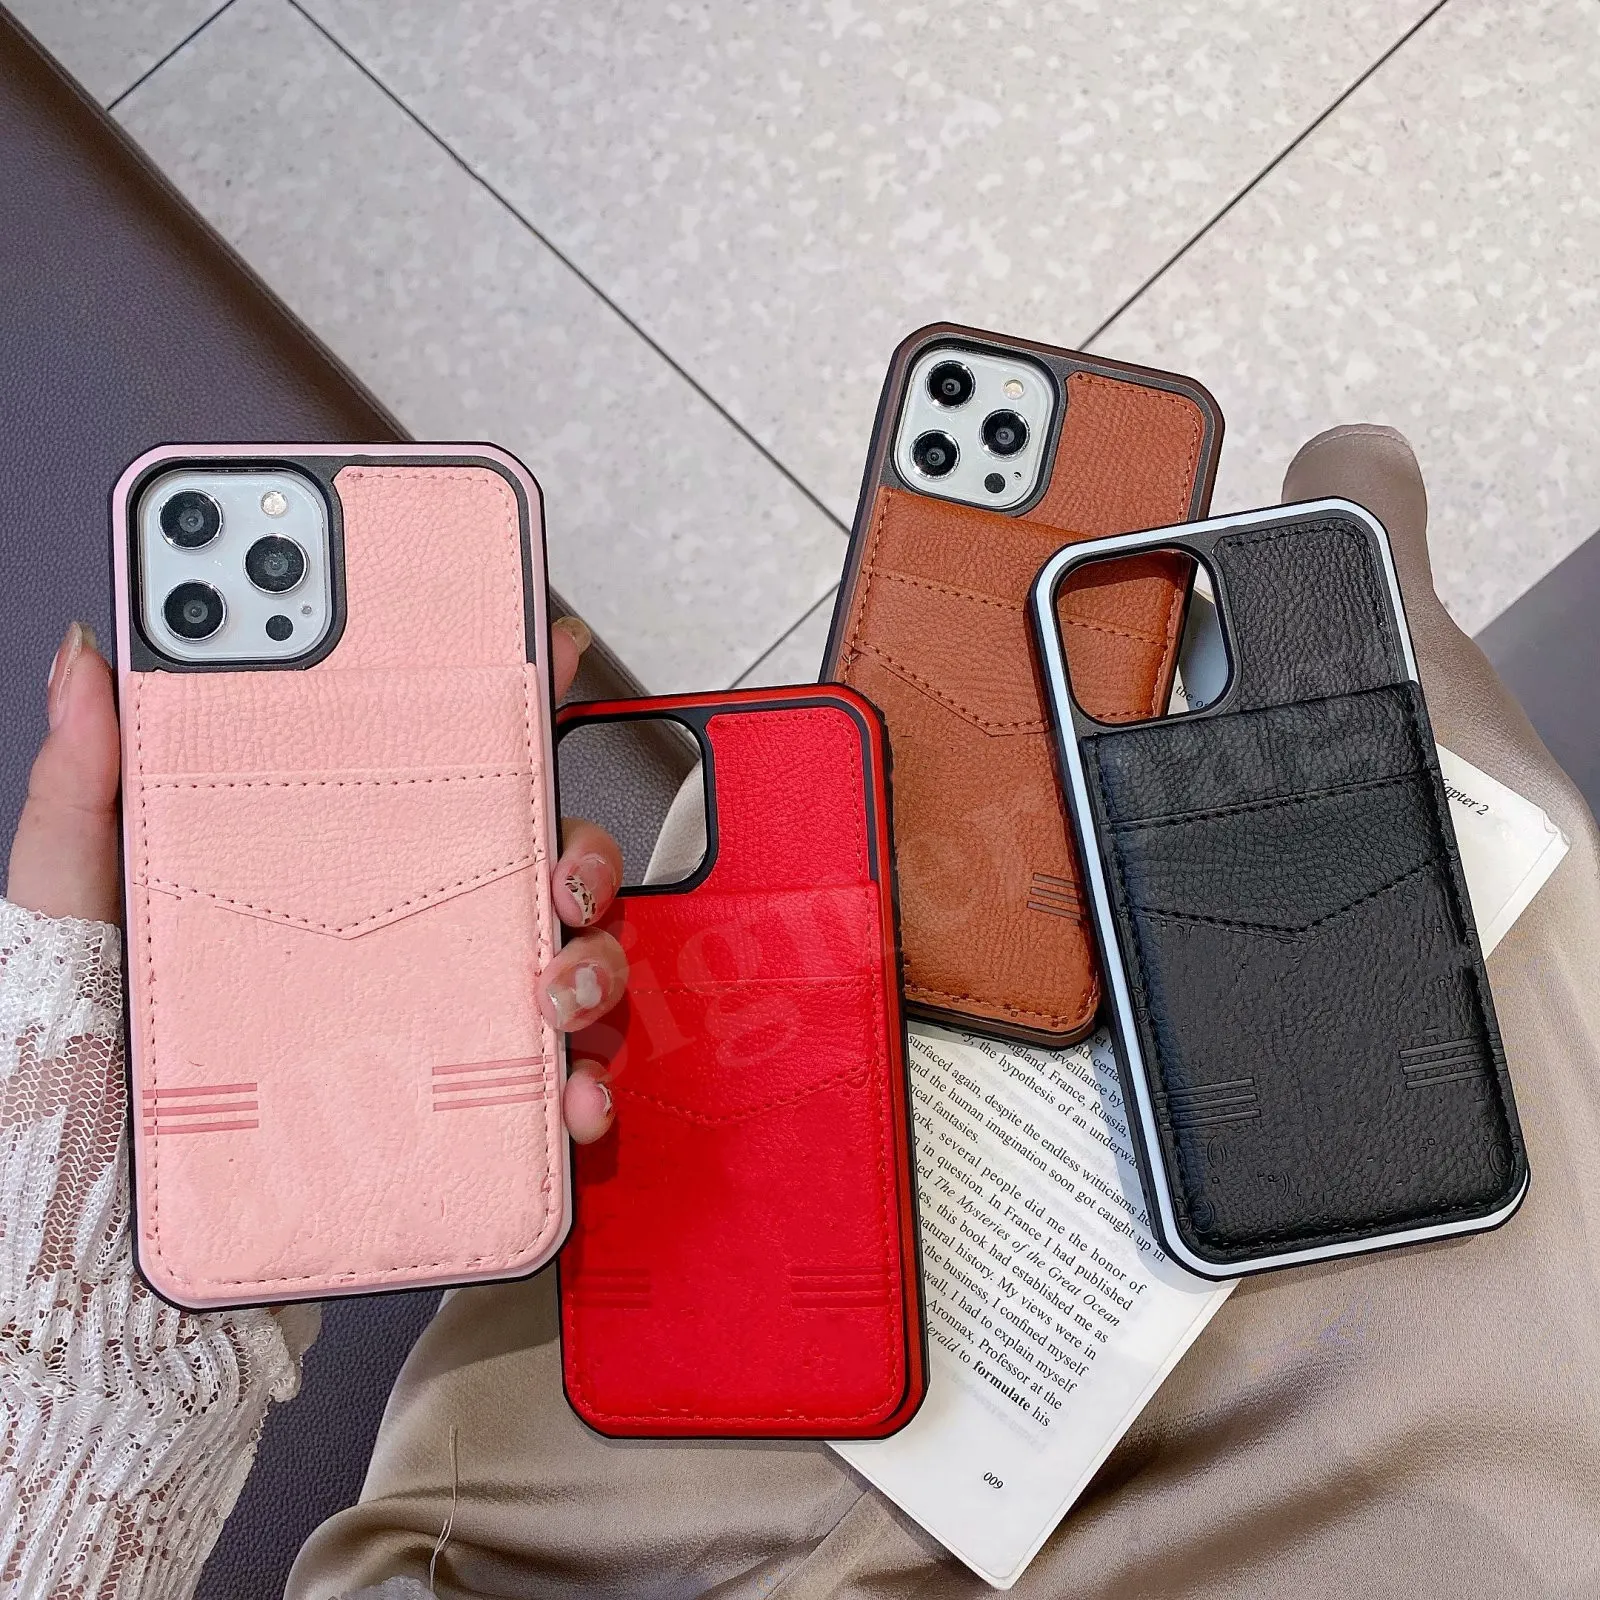 G Designer phone cases for Iphone 12 mini 11 Pro 11pro x xr xs max 7 8 Plus 8plus designers shell Coque Fundas curve Luxury cover With Card holders Wallet